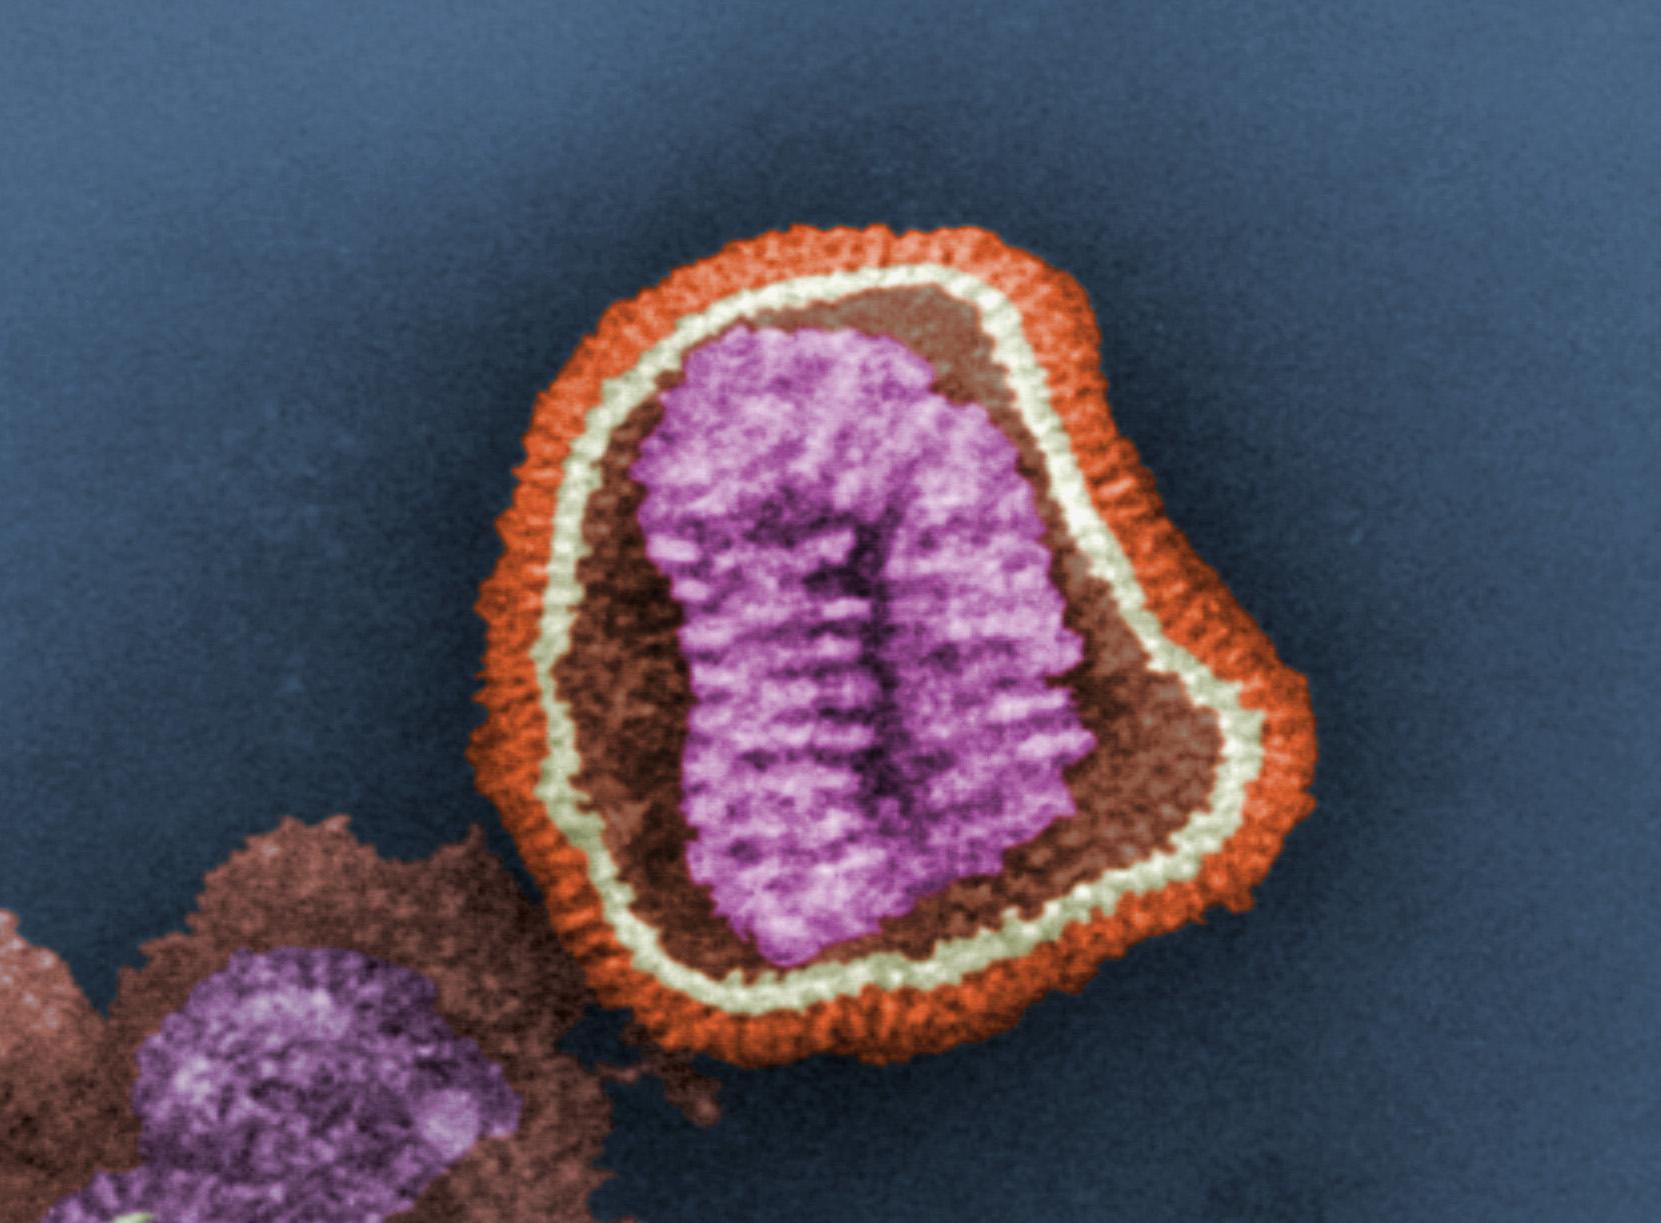 A digitally-colorized, negatively-stained transmission electron microscope image shows the details of an influenza virus particle. (Credit: CDC - Frederick Murphy)